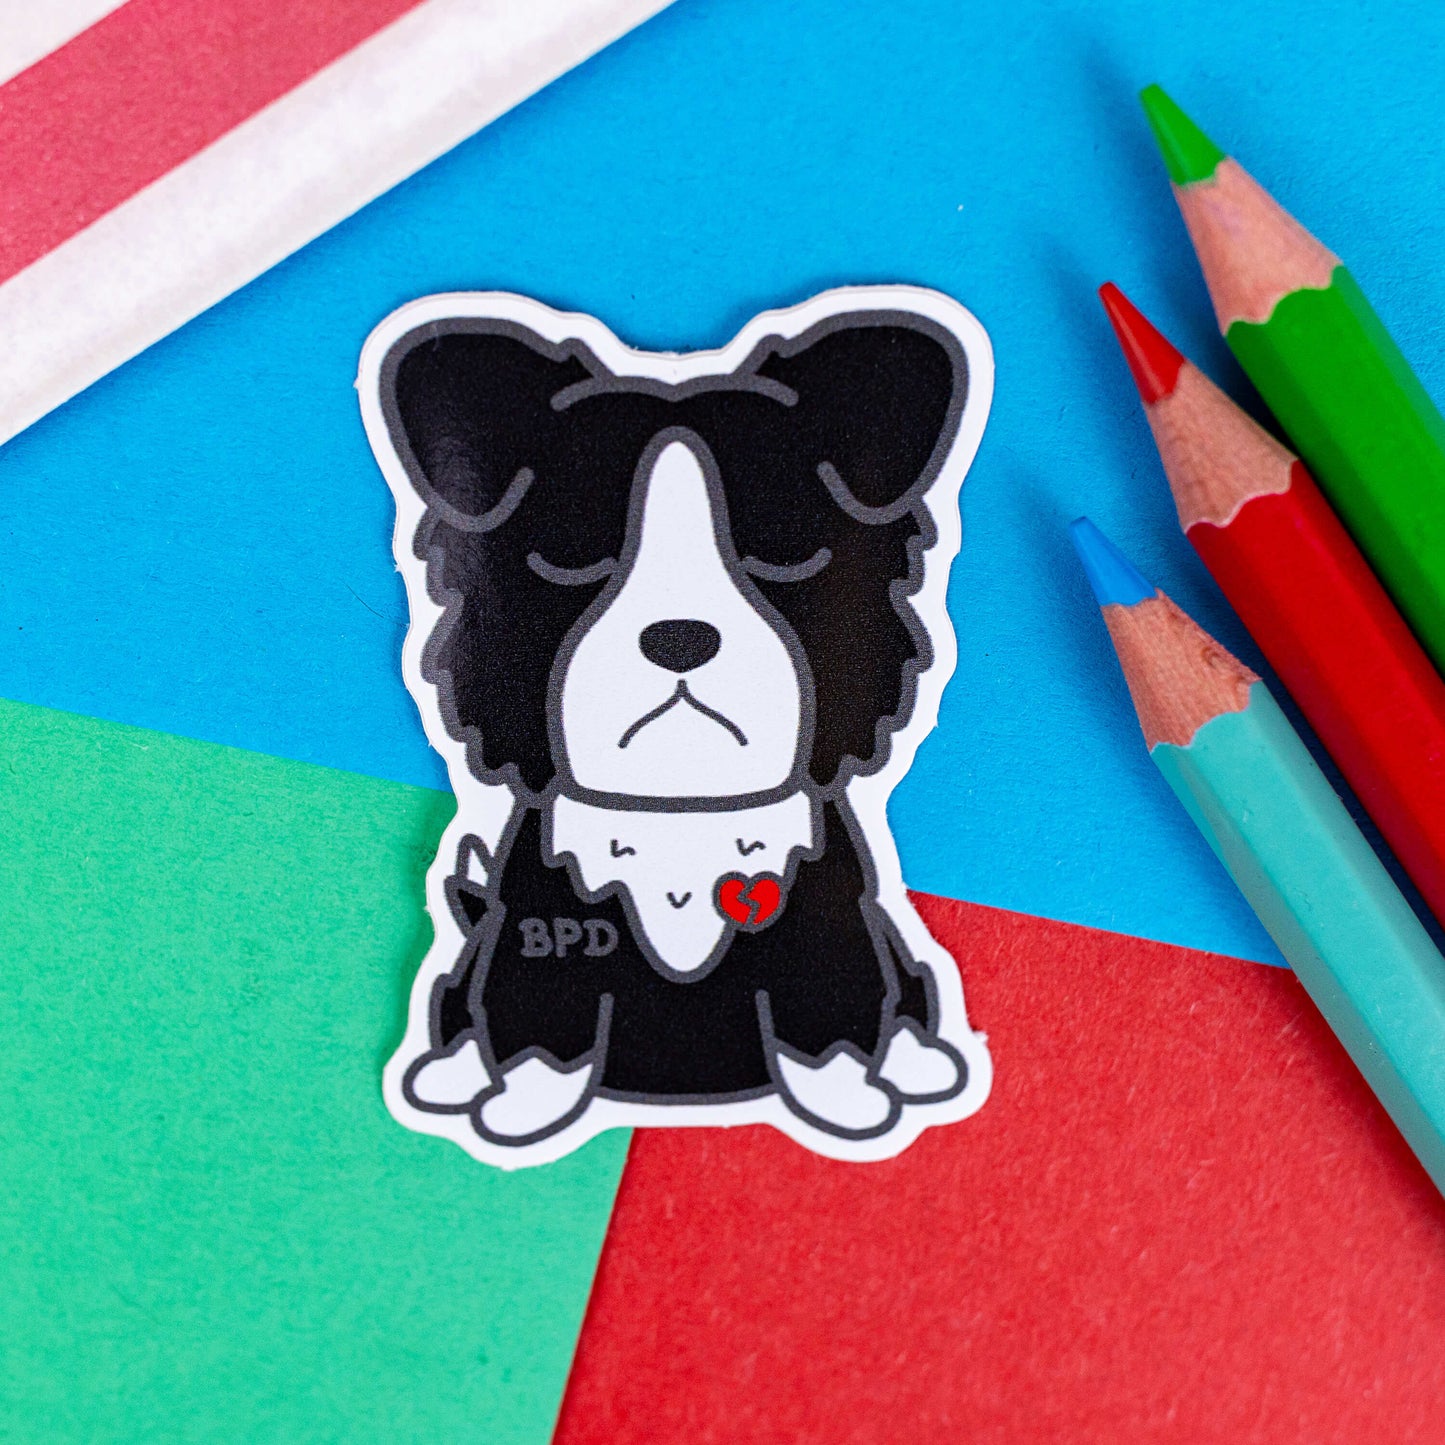 BPD Sticker - Borderline Personality Disorder on a blue, red and green background with colouring pencils and a red stripe candy bag. The black and white sad fluffy dog sticker has a broken heart with BPD written across its chest. The sticker is designed to raise awareness for Borderline Personality Disorder.